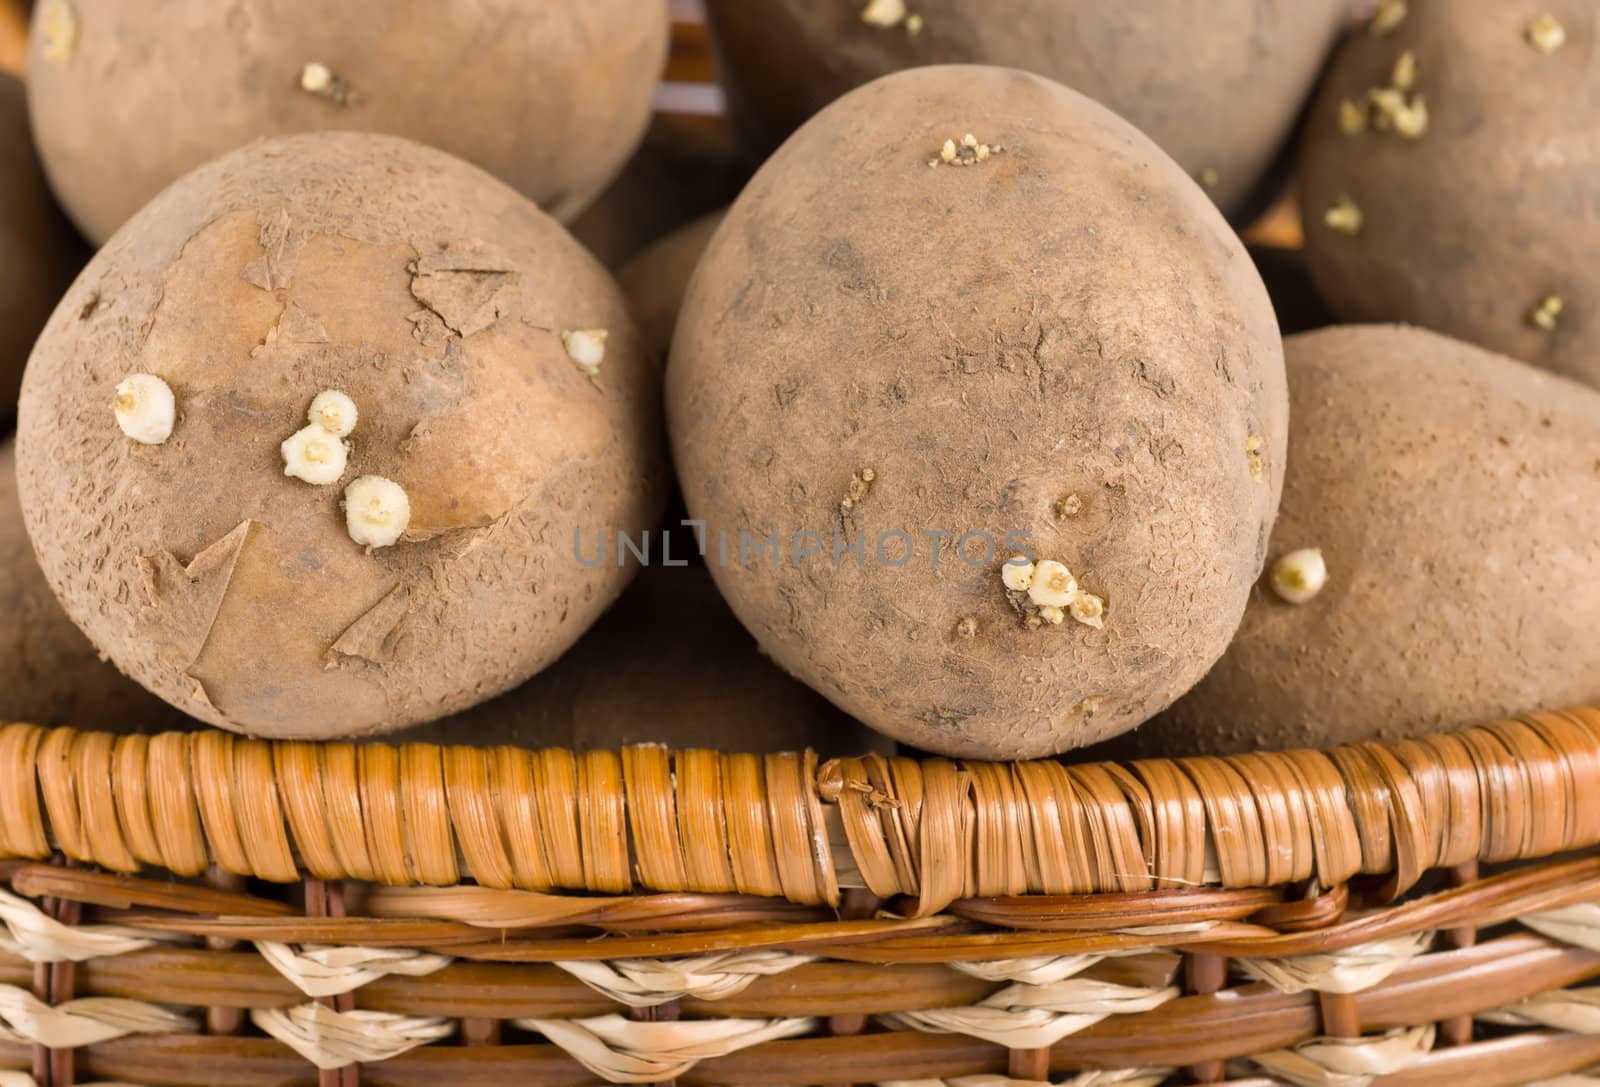 Raw potatoes in wooden basket by Givaga